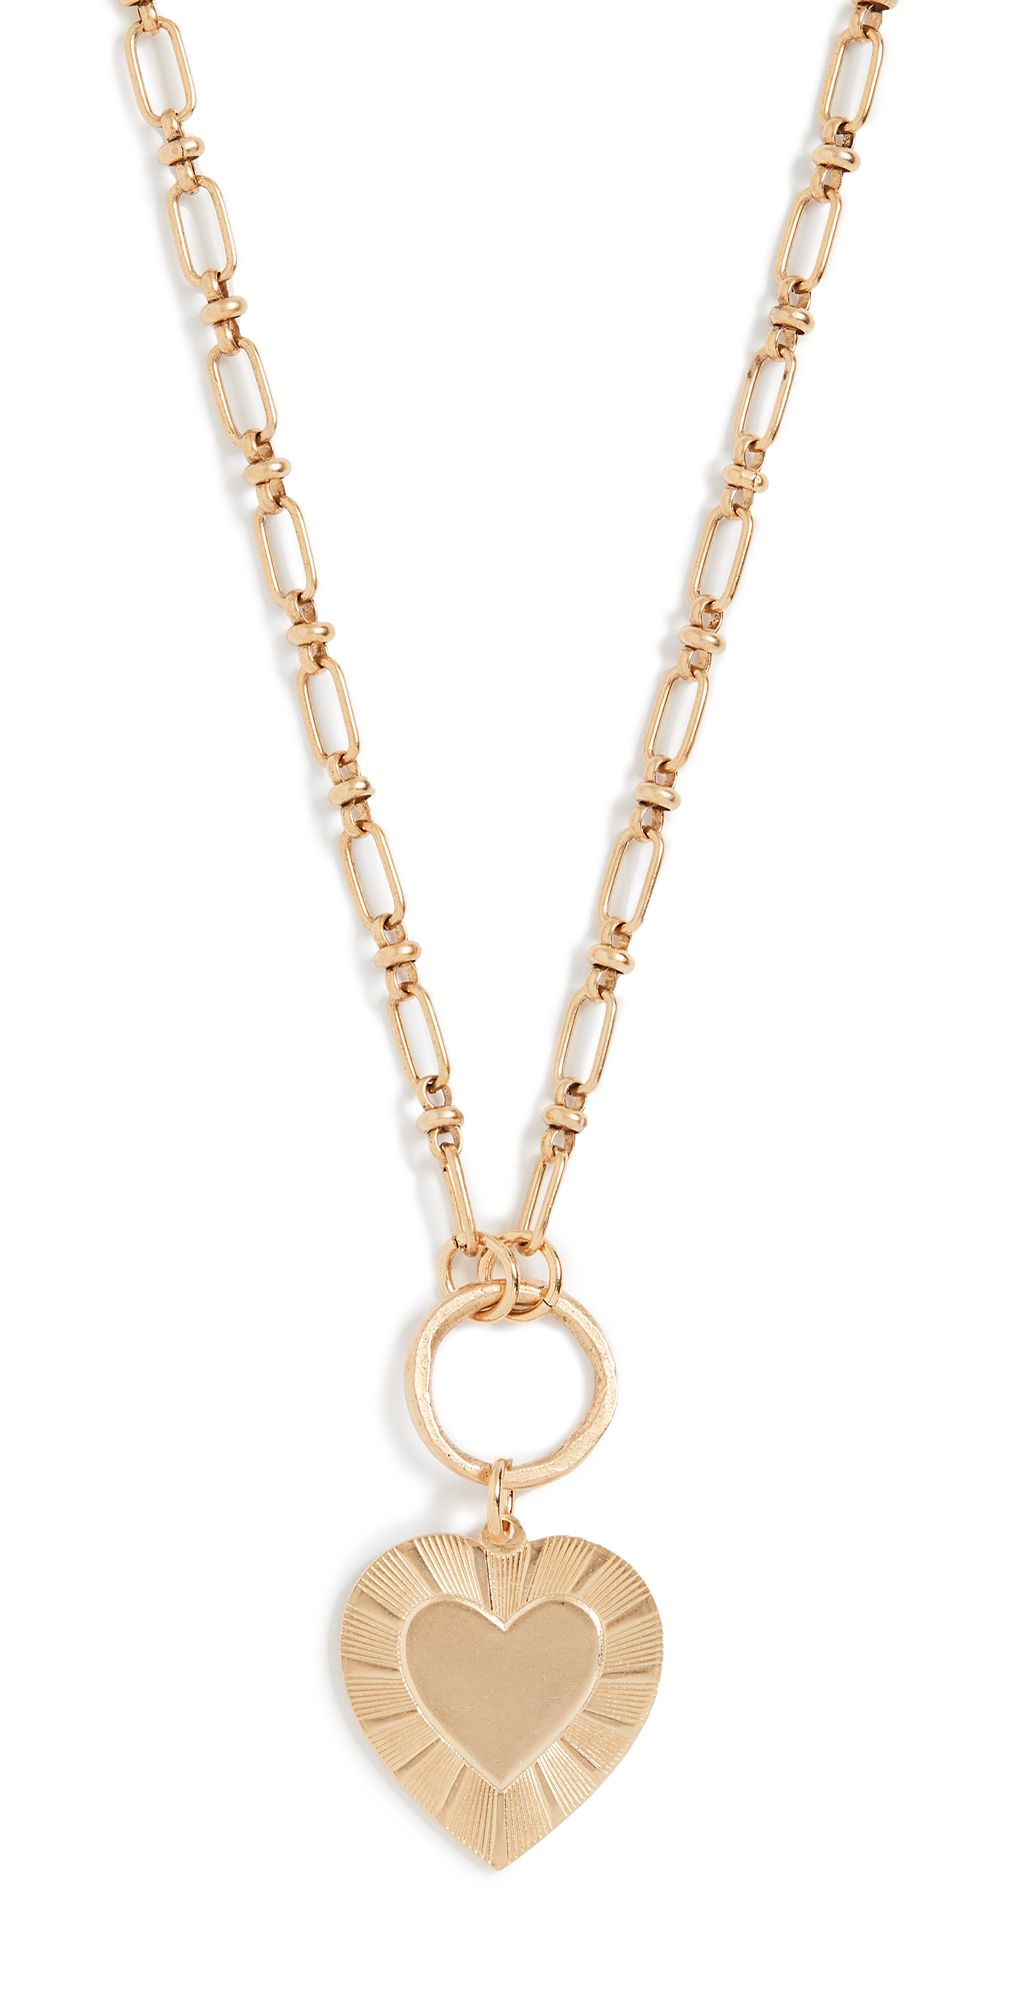 The Best Is Yet To Come Necklace | Shopbop